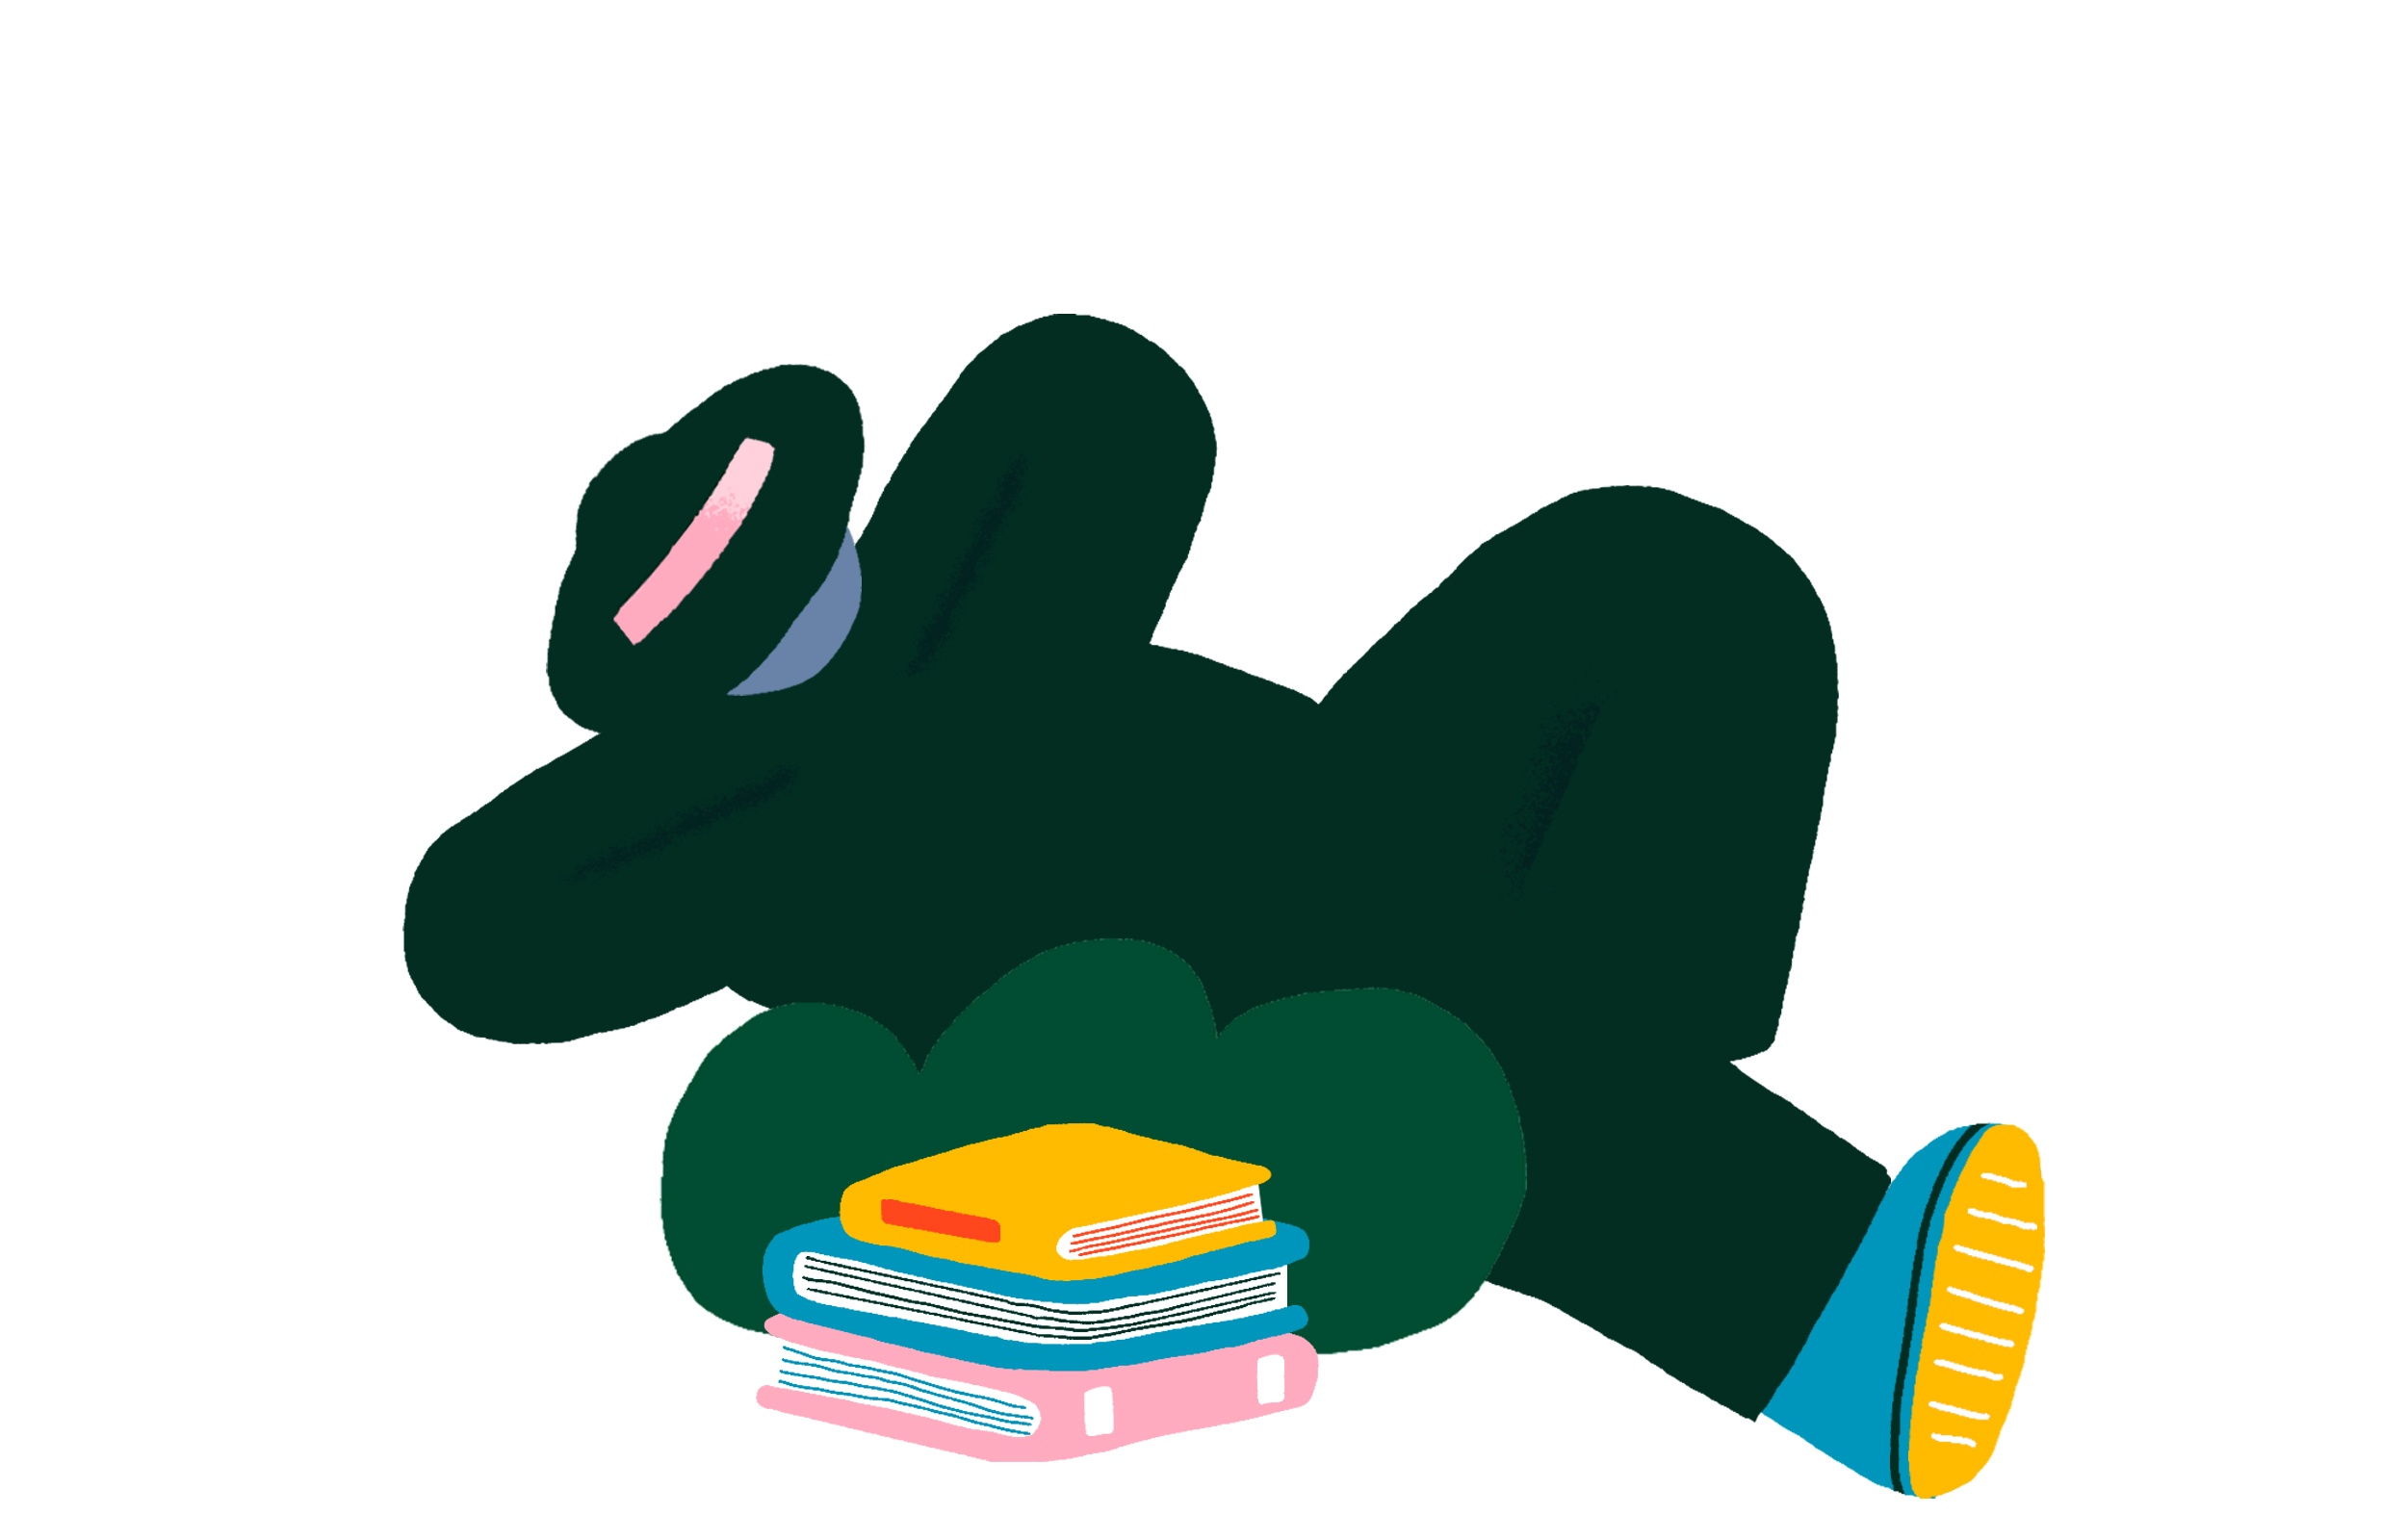 napping with books illustration